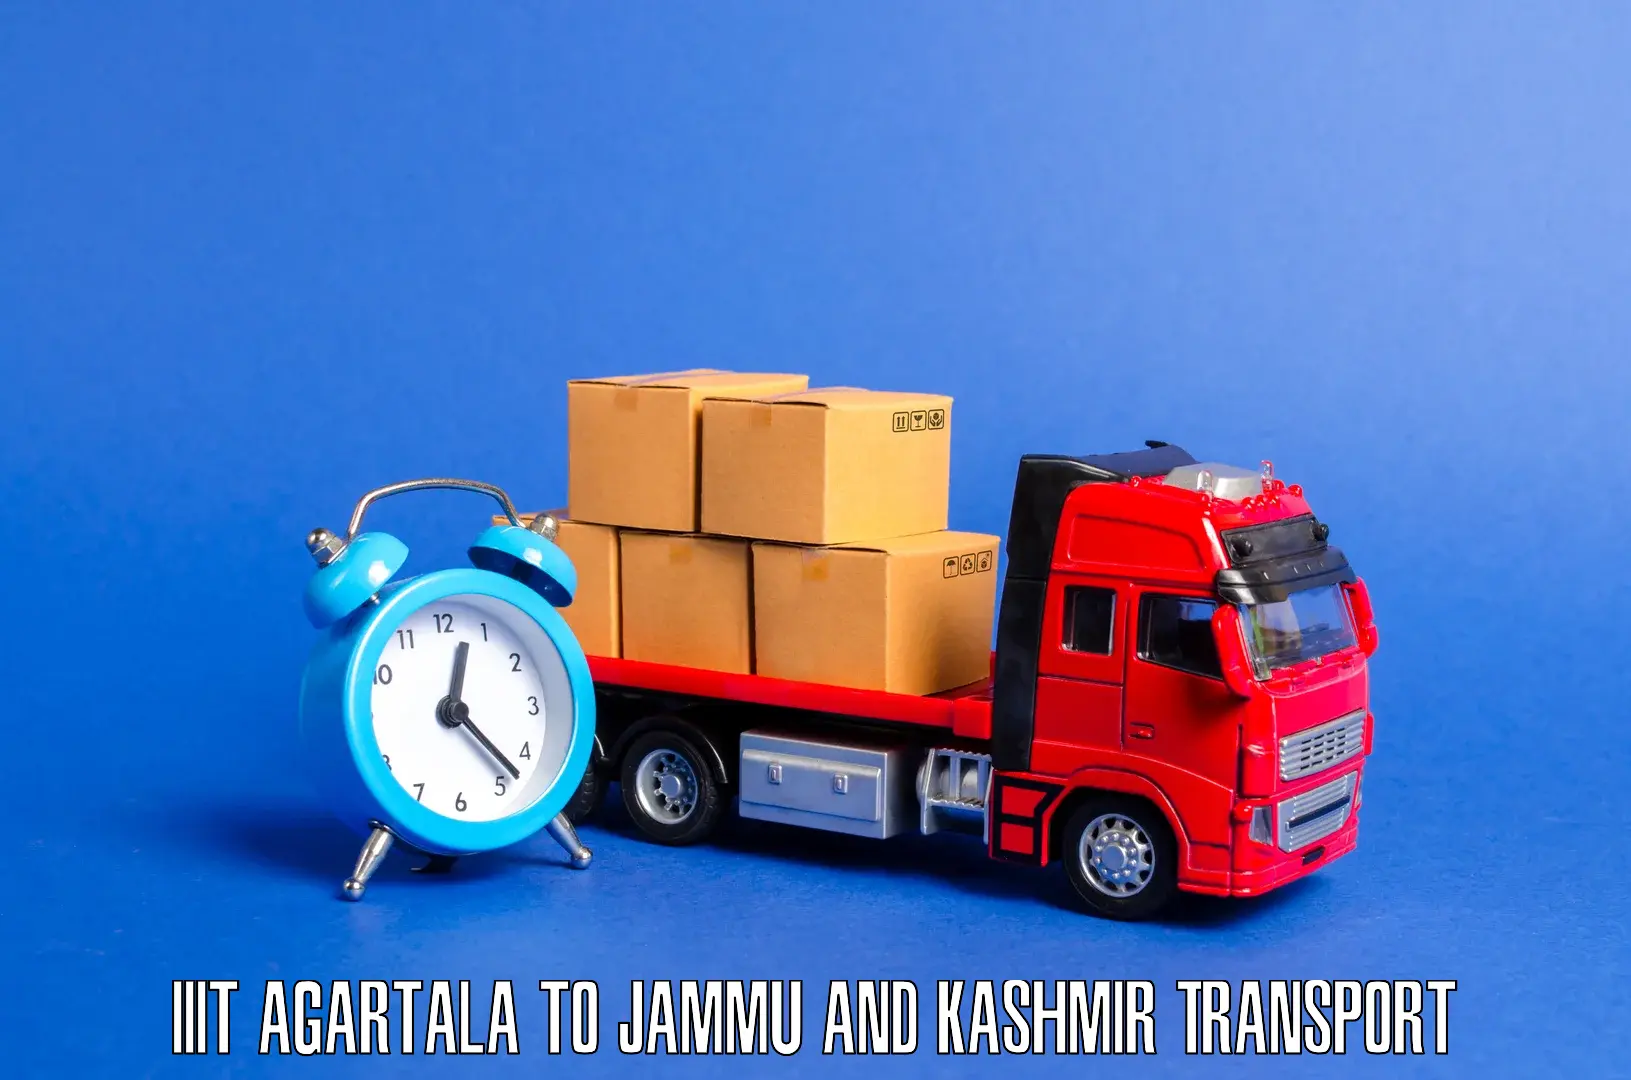 Material transport services IIIT Agartala to Budgam